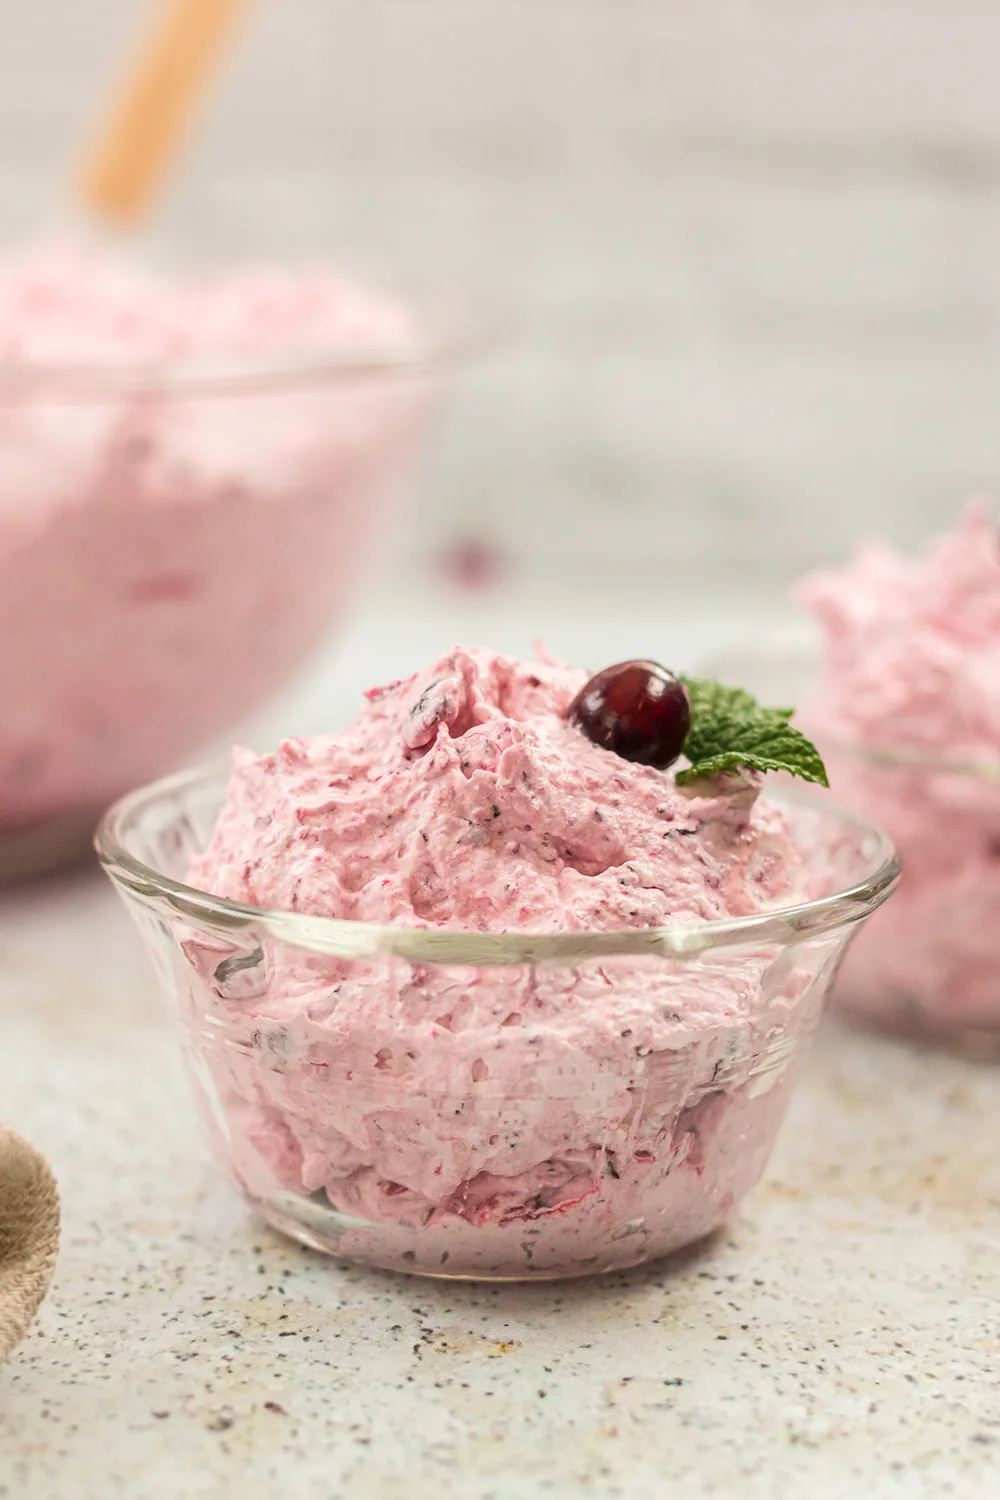 Dish with a fluffy pink salad topped with a cranberry.